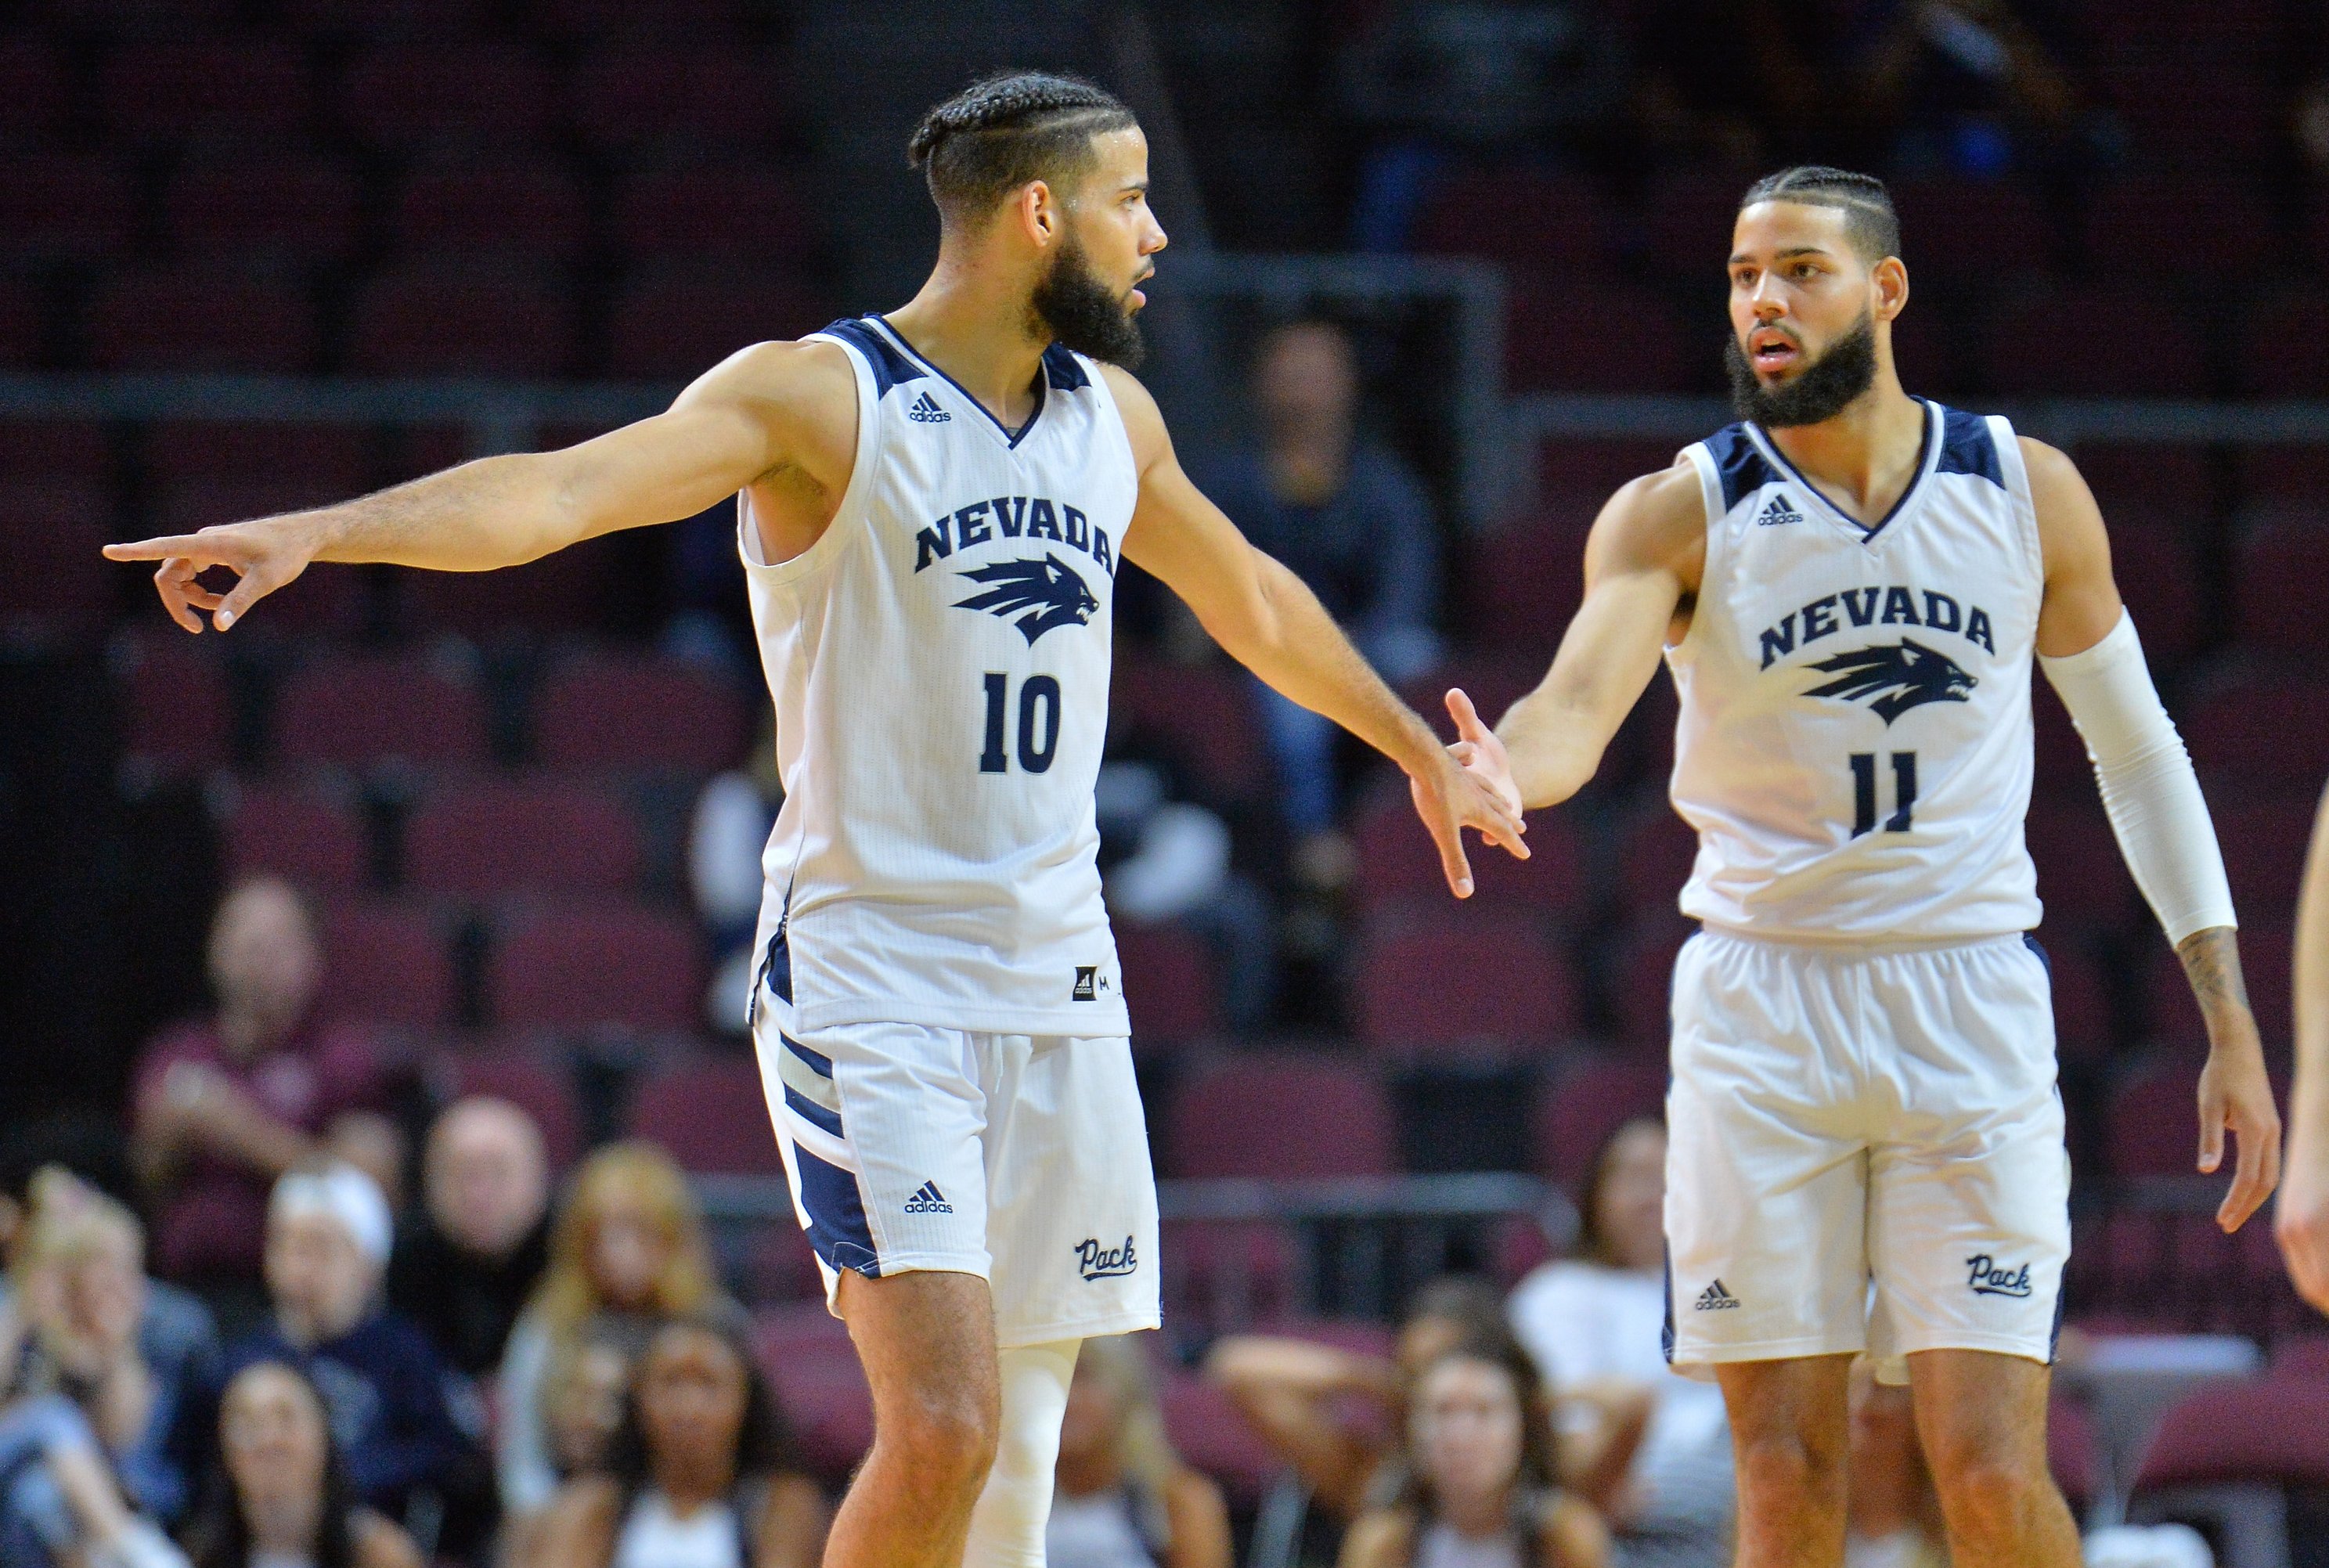 Inspired by their mother, twins Cody and Caleb Martin are leading